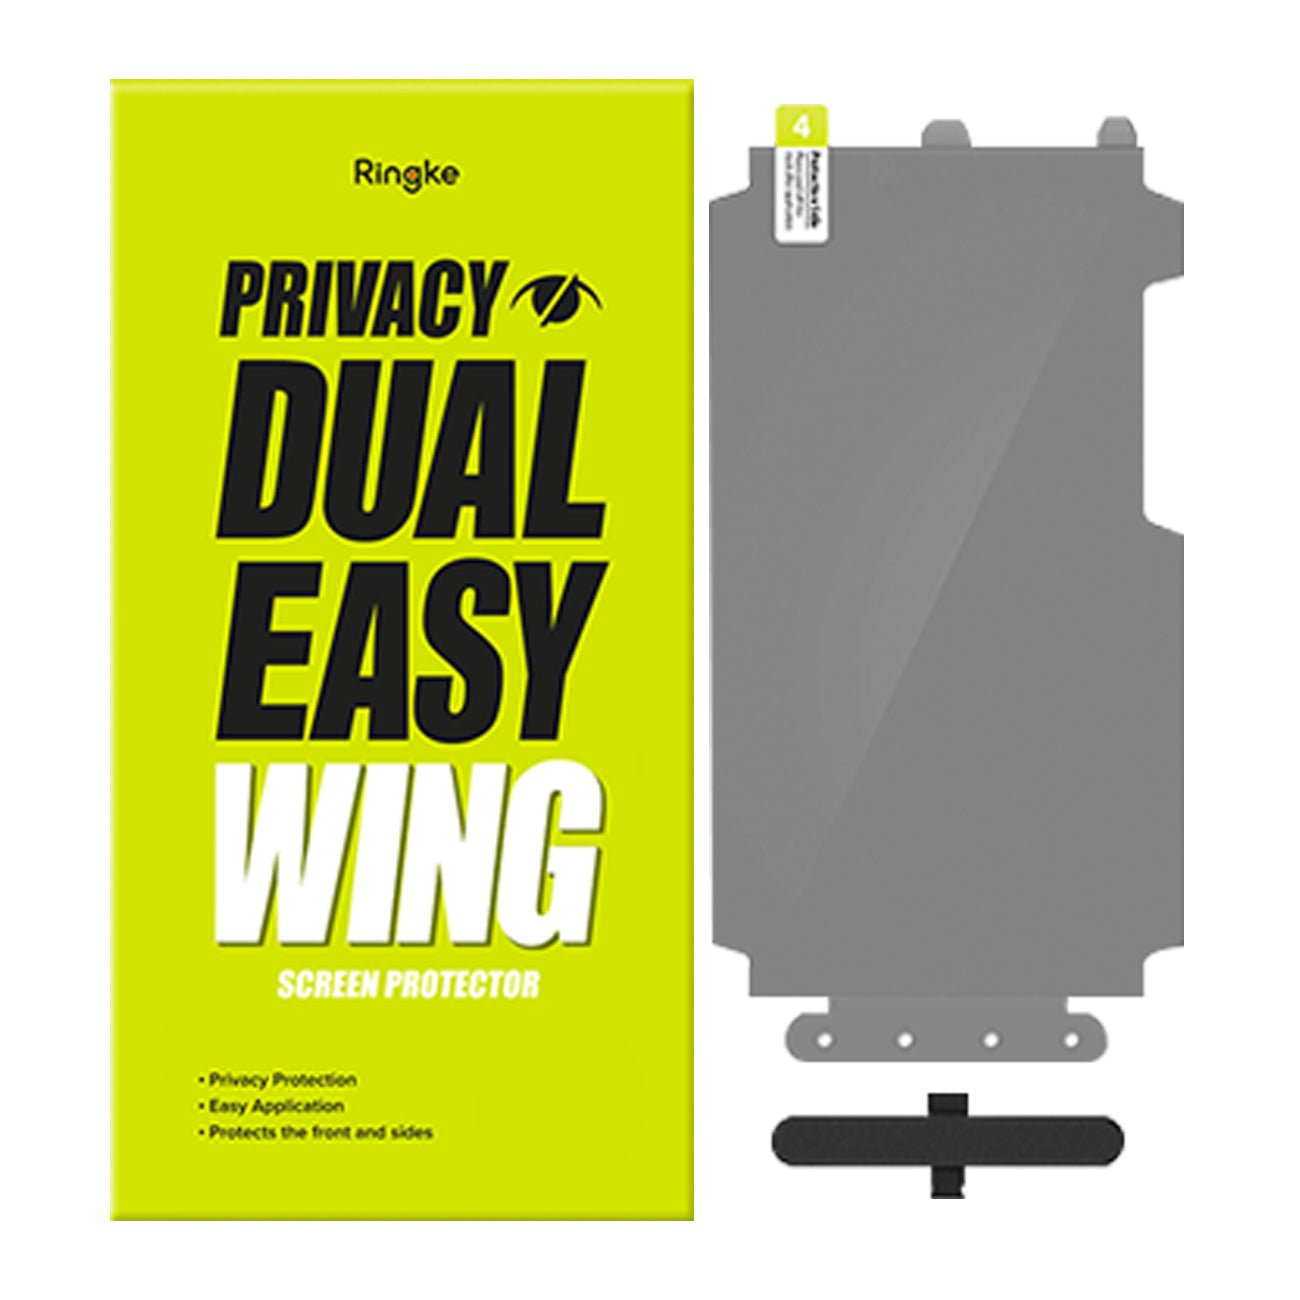 Ringke DUAL EASY SCREEN PROTECTOR - PRIVACY DUAL EASY WING FILM